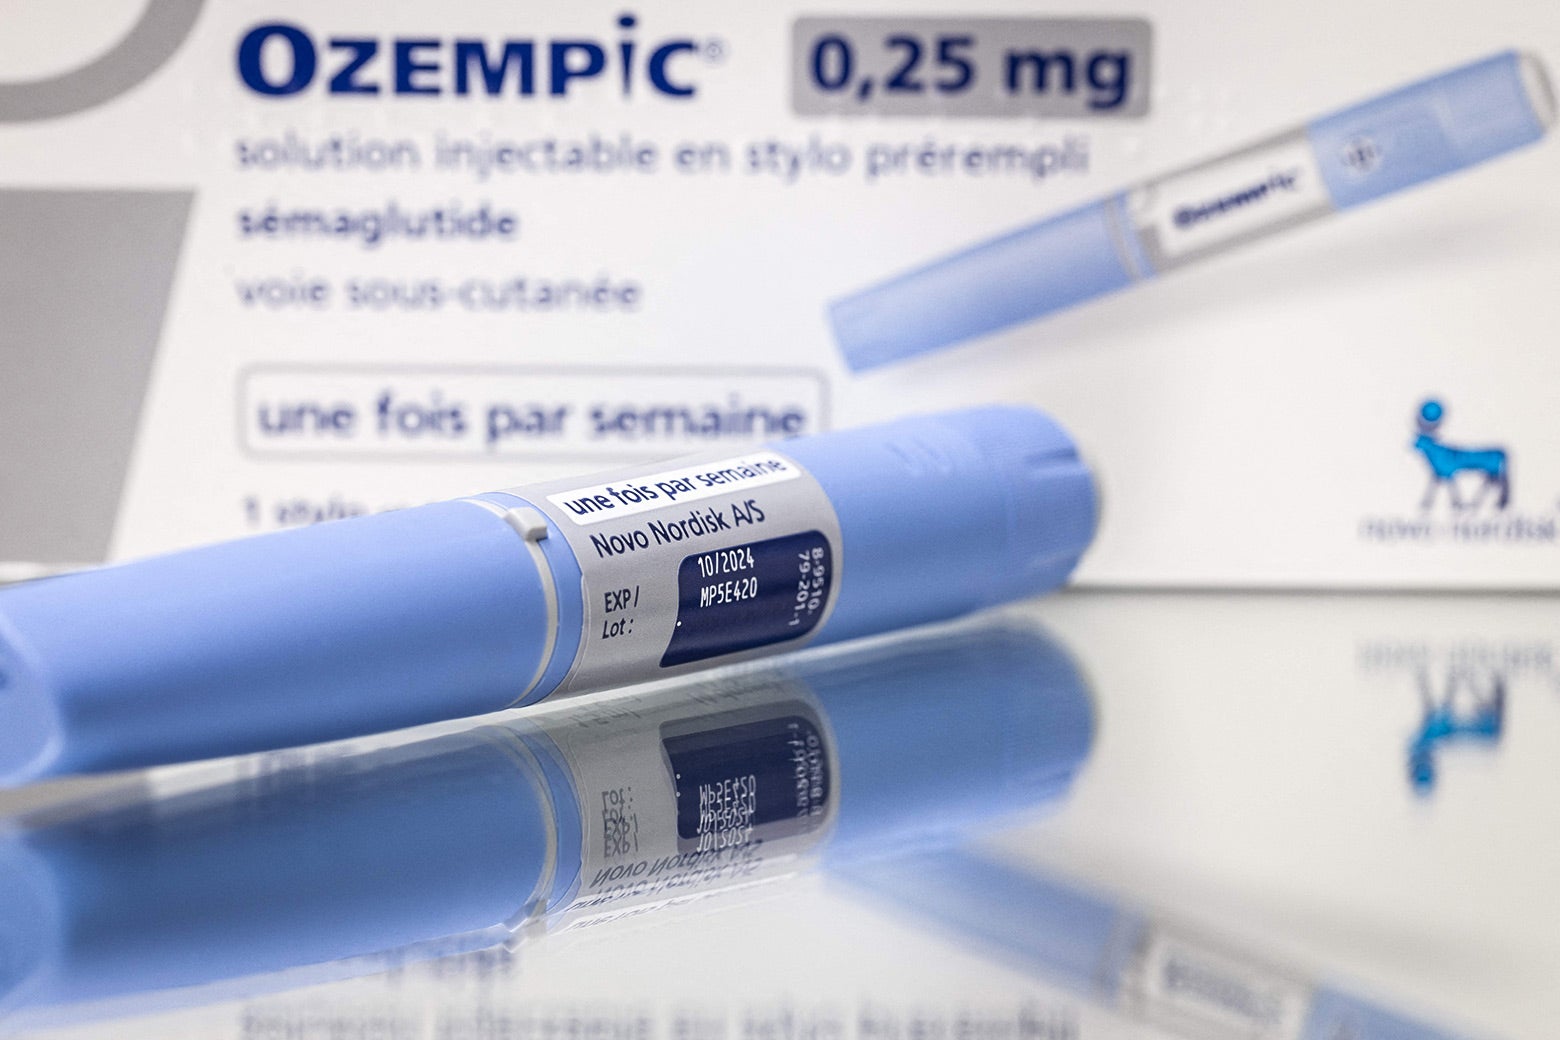 A box of the diabetes medication Ozempic, with a syringe lying next to it.